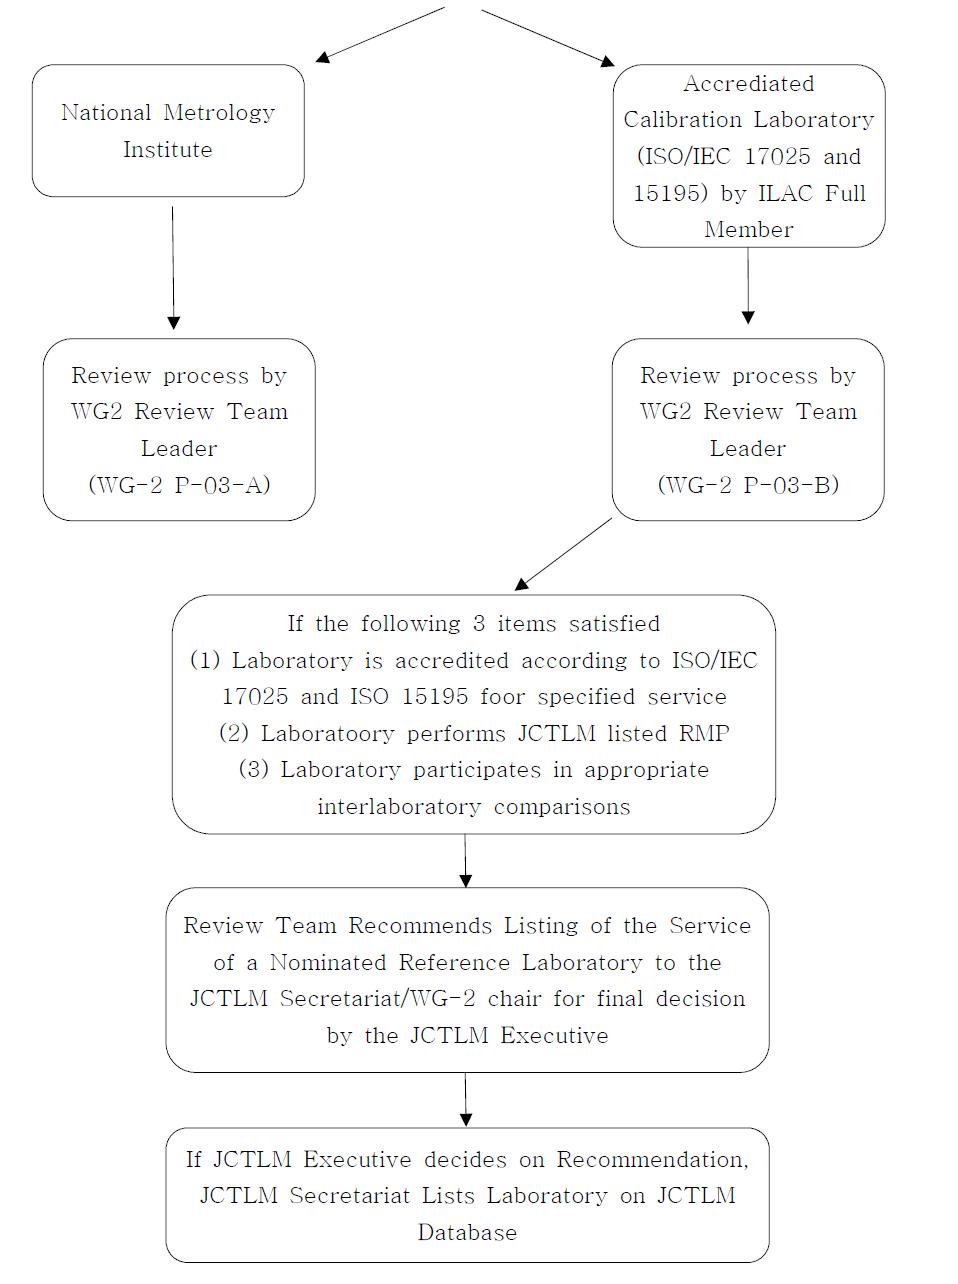 Flow diagram of JCTLM reference laboratory